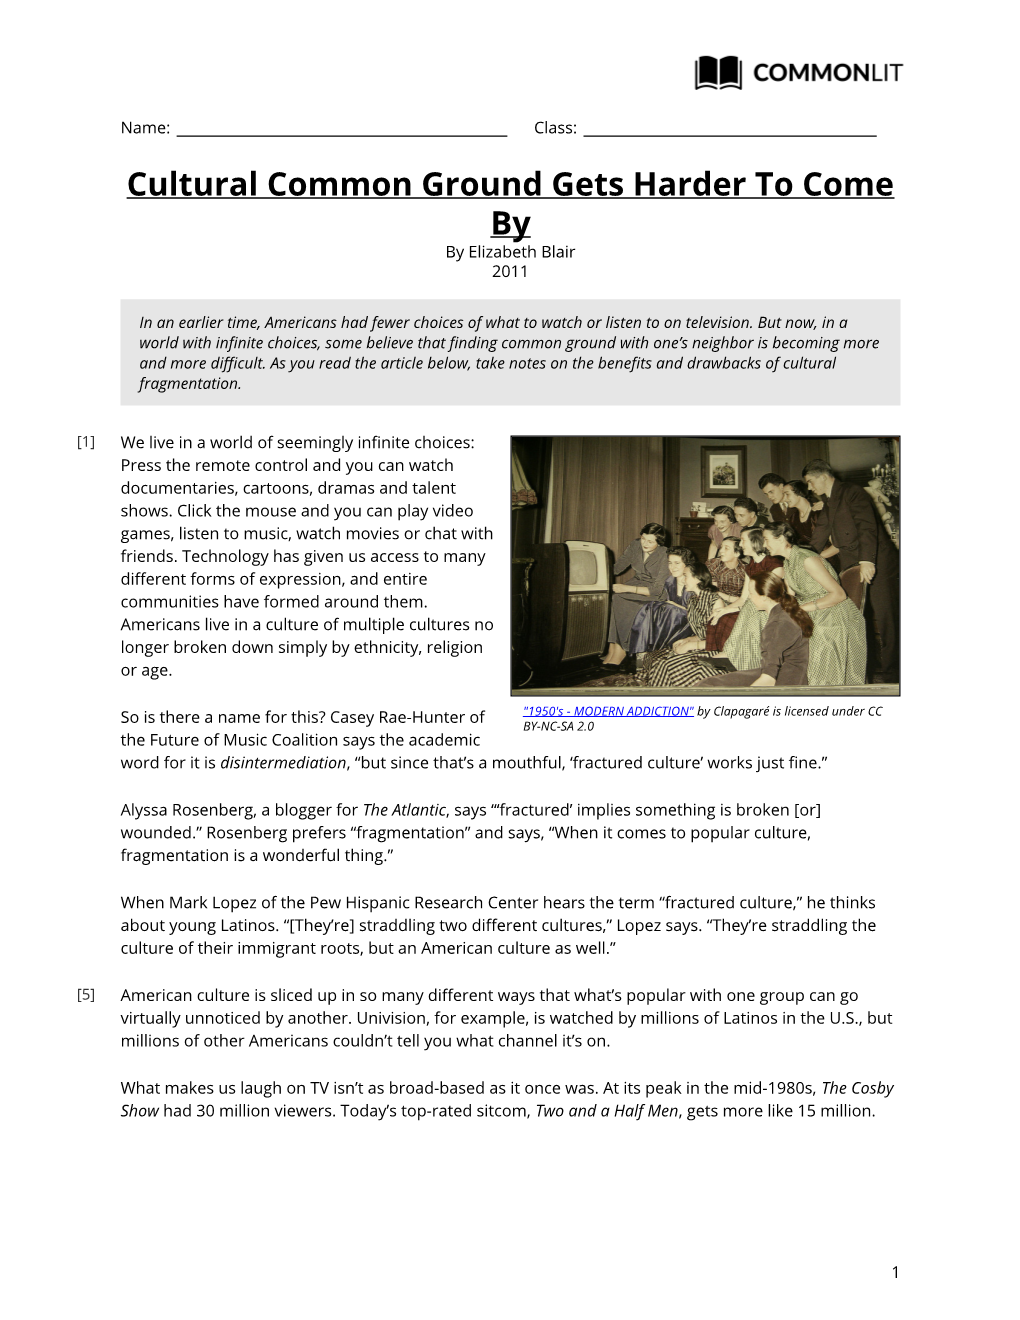 Cultural Common Ground Gets Harder to Come by by Elizabeth Blair 2011